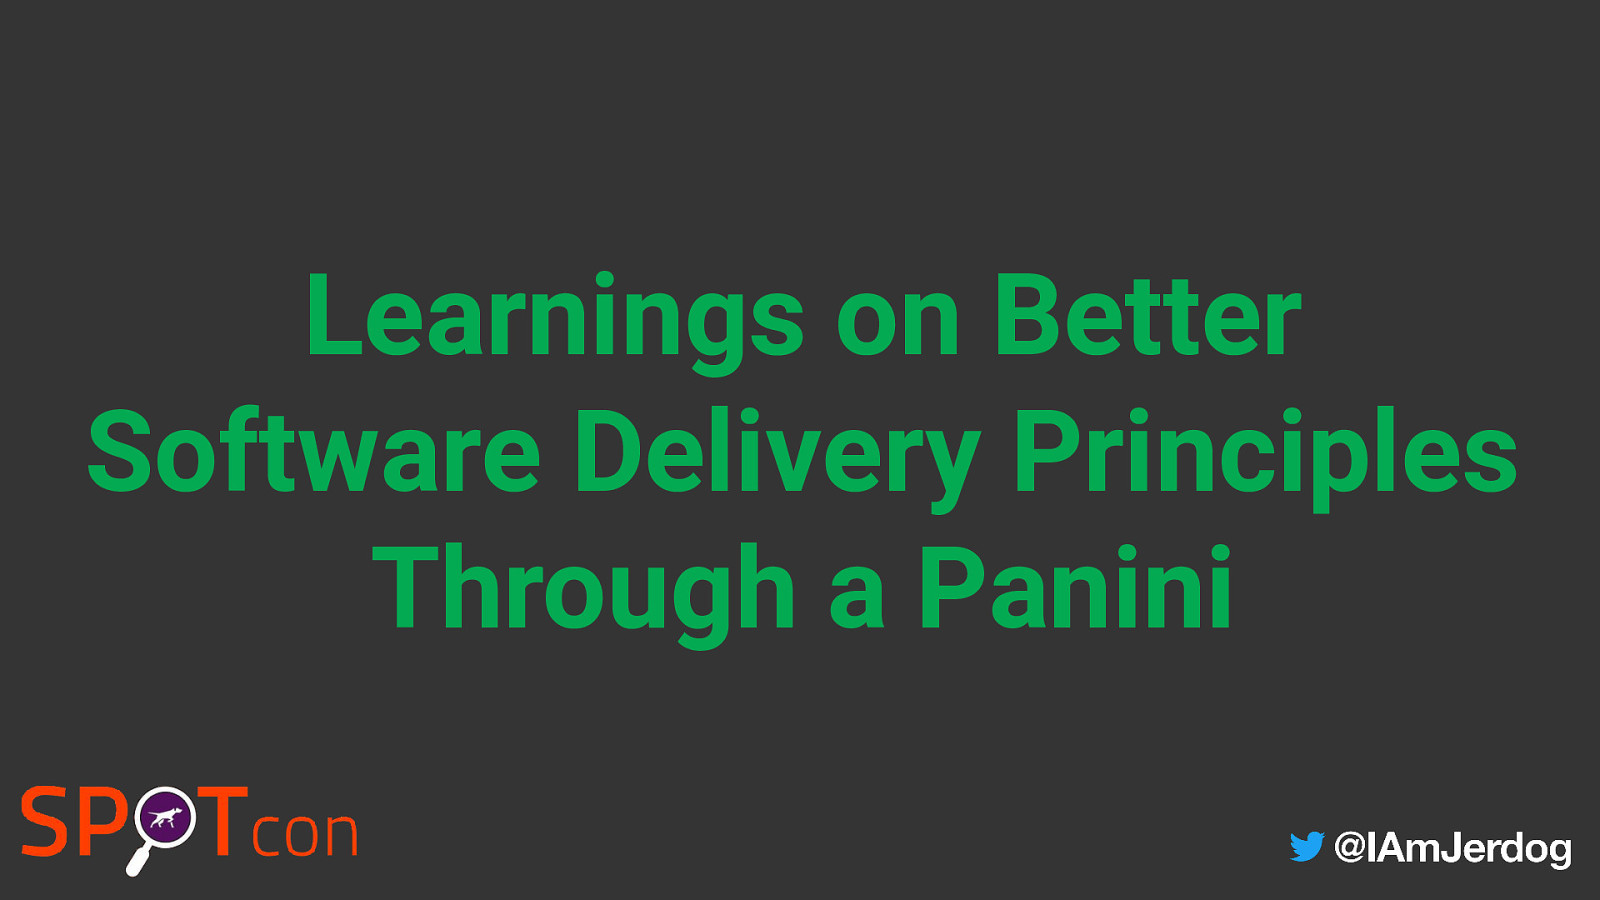 Things we’ve learned about better software delivery principles through a pandemic by Jeremy Meiss